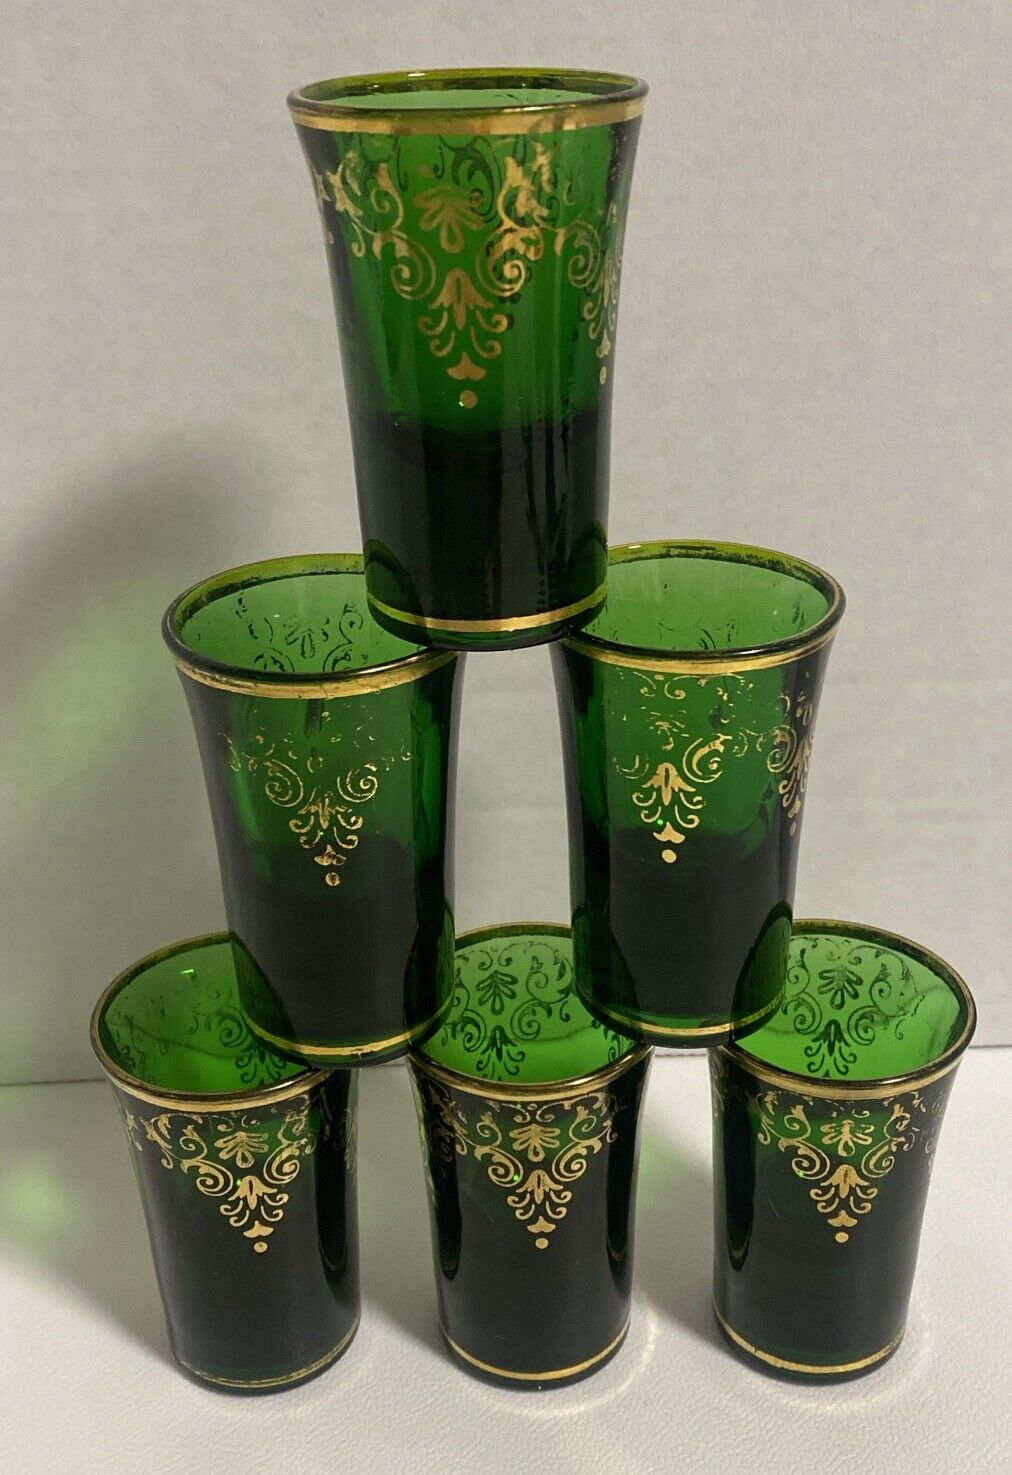 Emerald Green Tall Shot Glasses with Gold Accents / Lot of 6